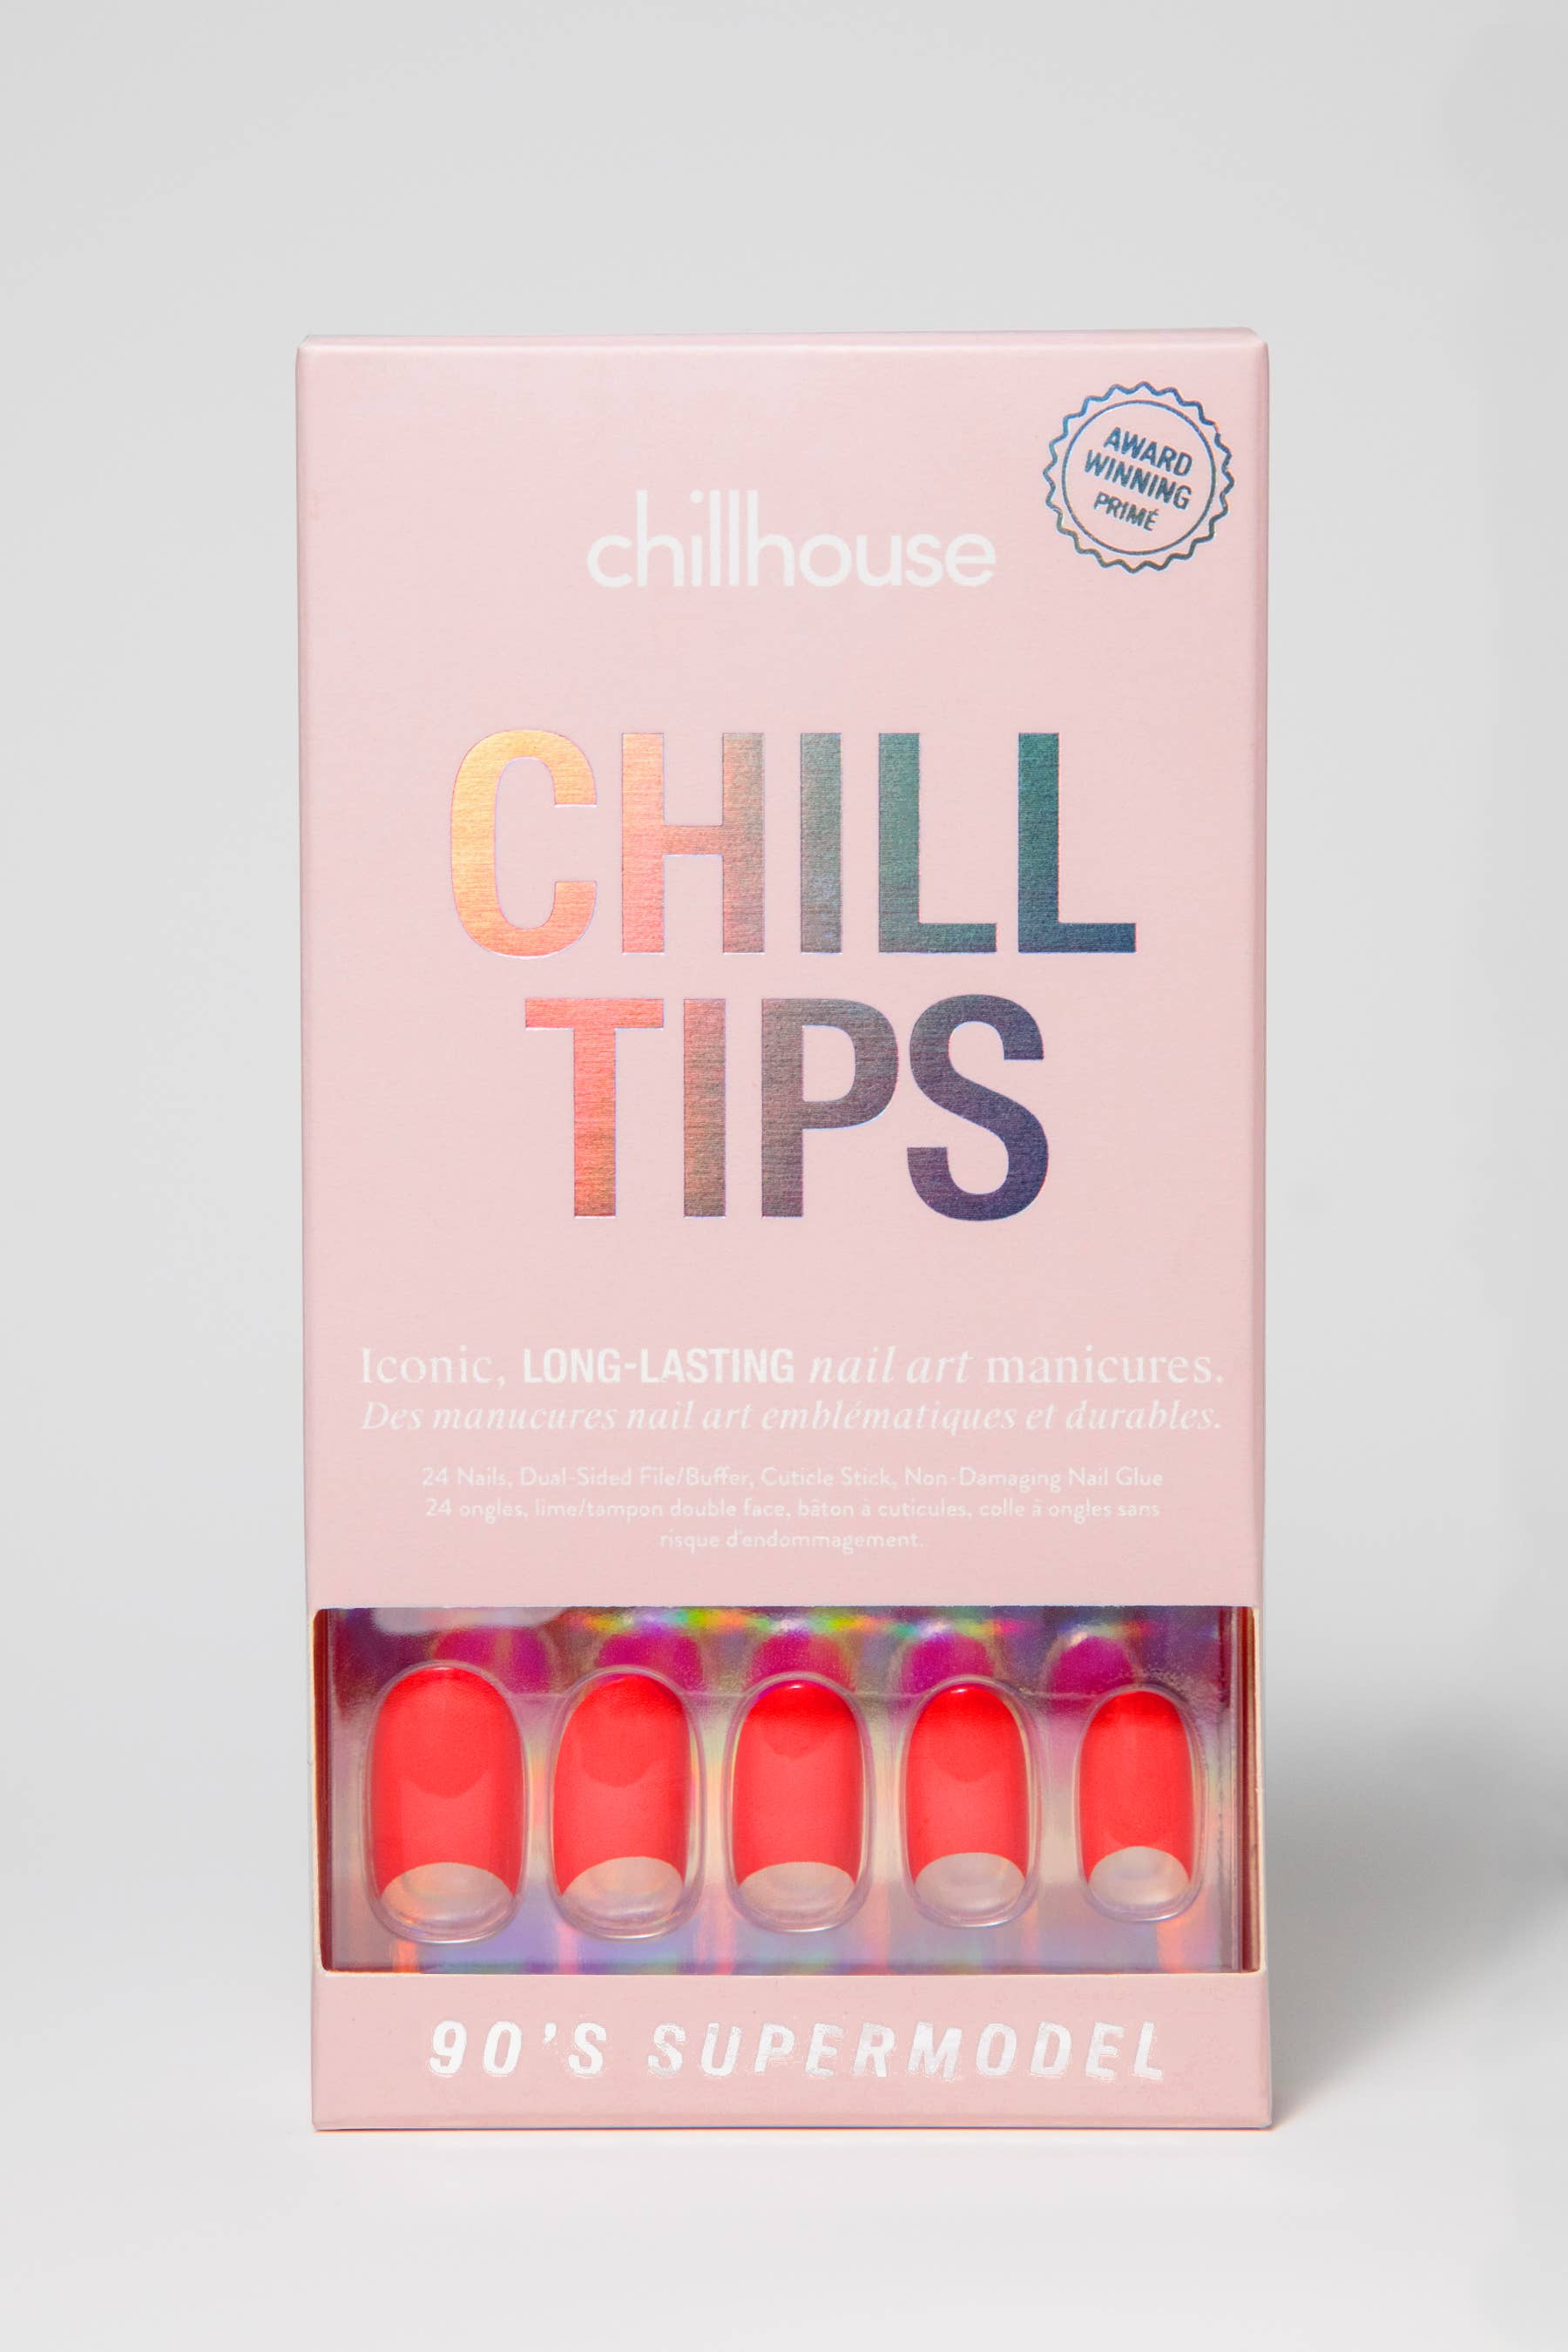 Chill Tips - 90's Supermodel by Chillhouse